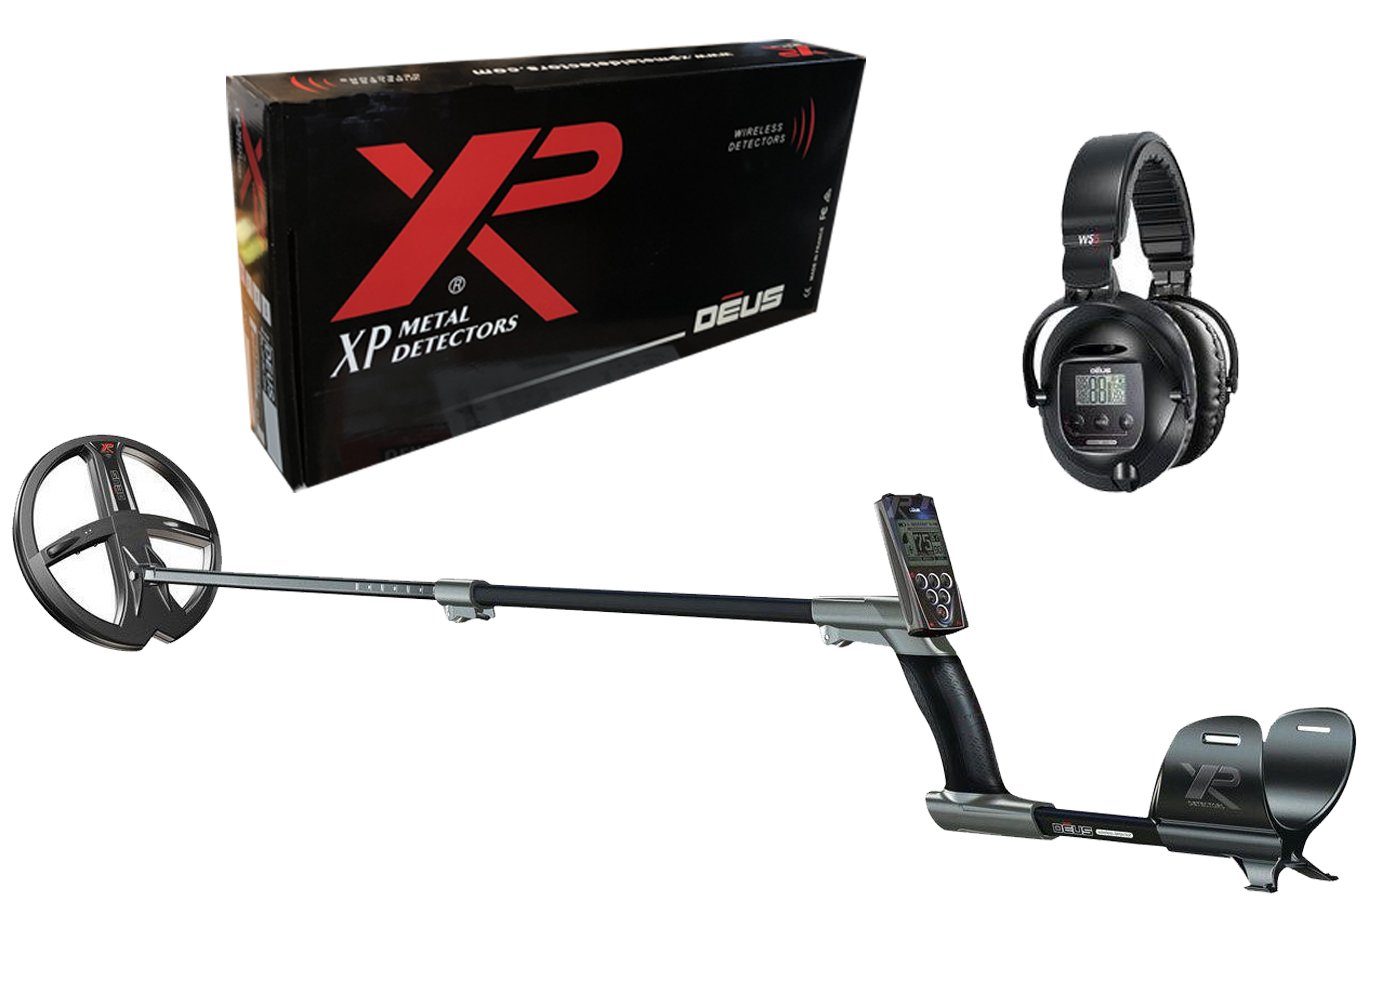 XP DEUS Detector, 9" X35 Coil, LCD Remote, and WS5 Headphones